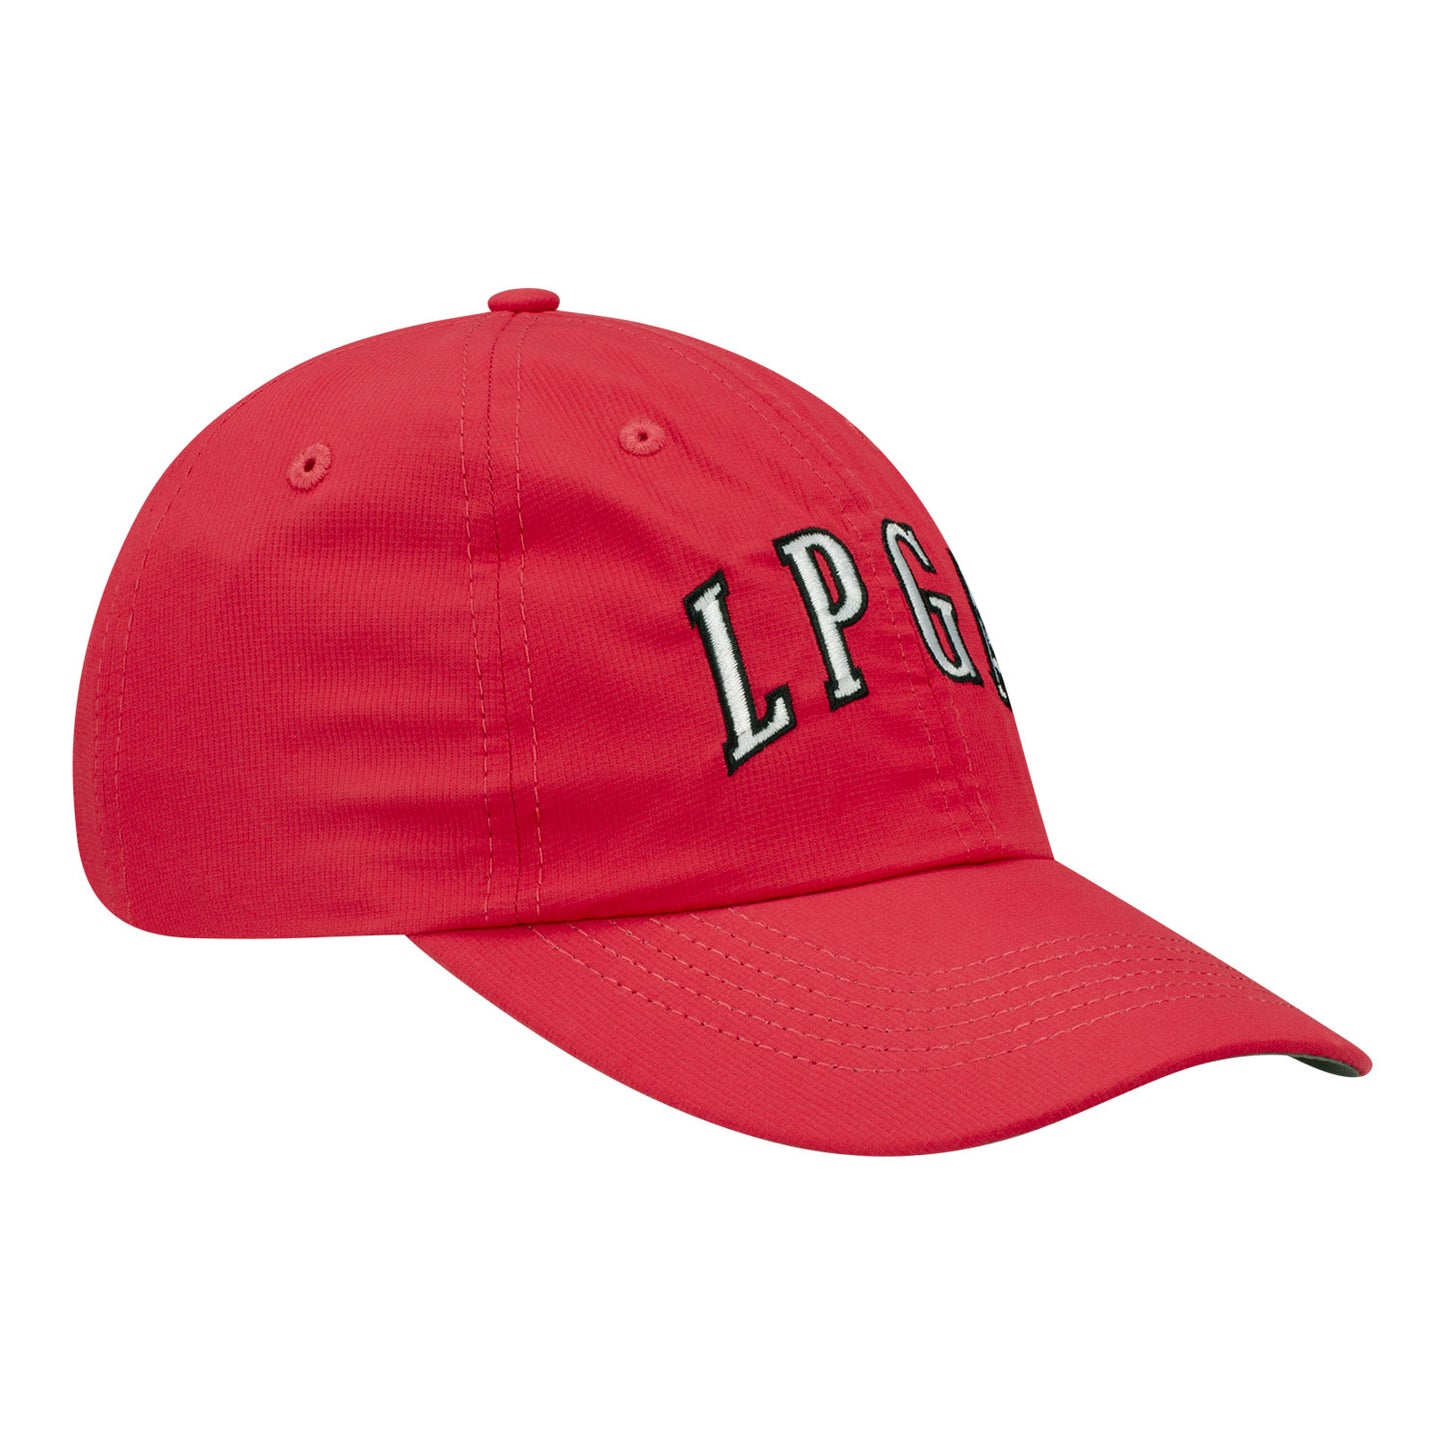 Imperial 2023 LPGA Women's Hat in Nantucket Red - Angled Right Side View